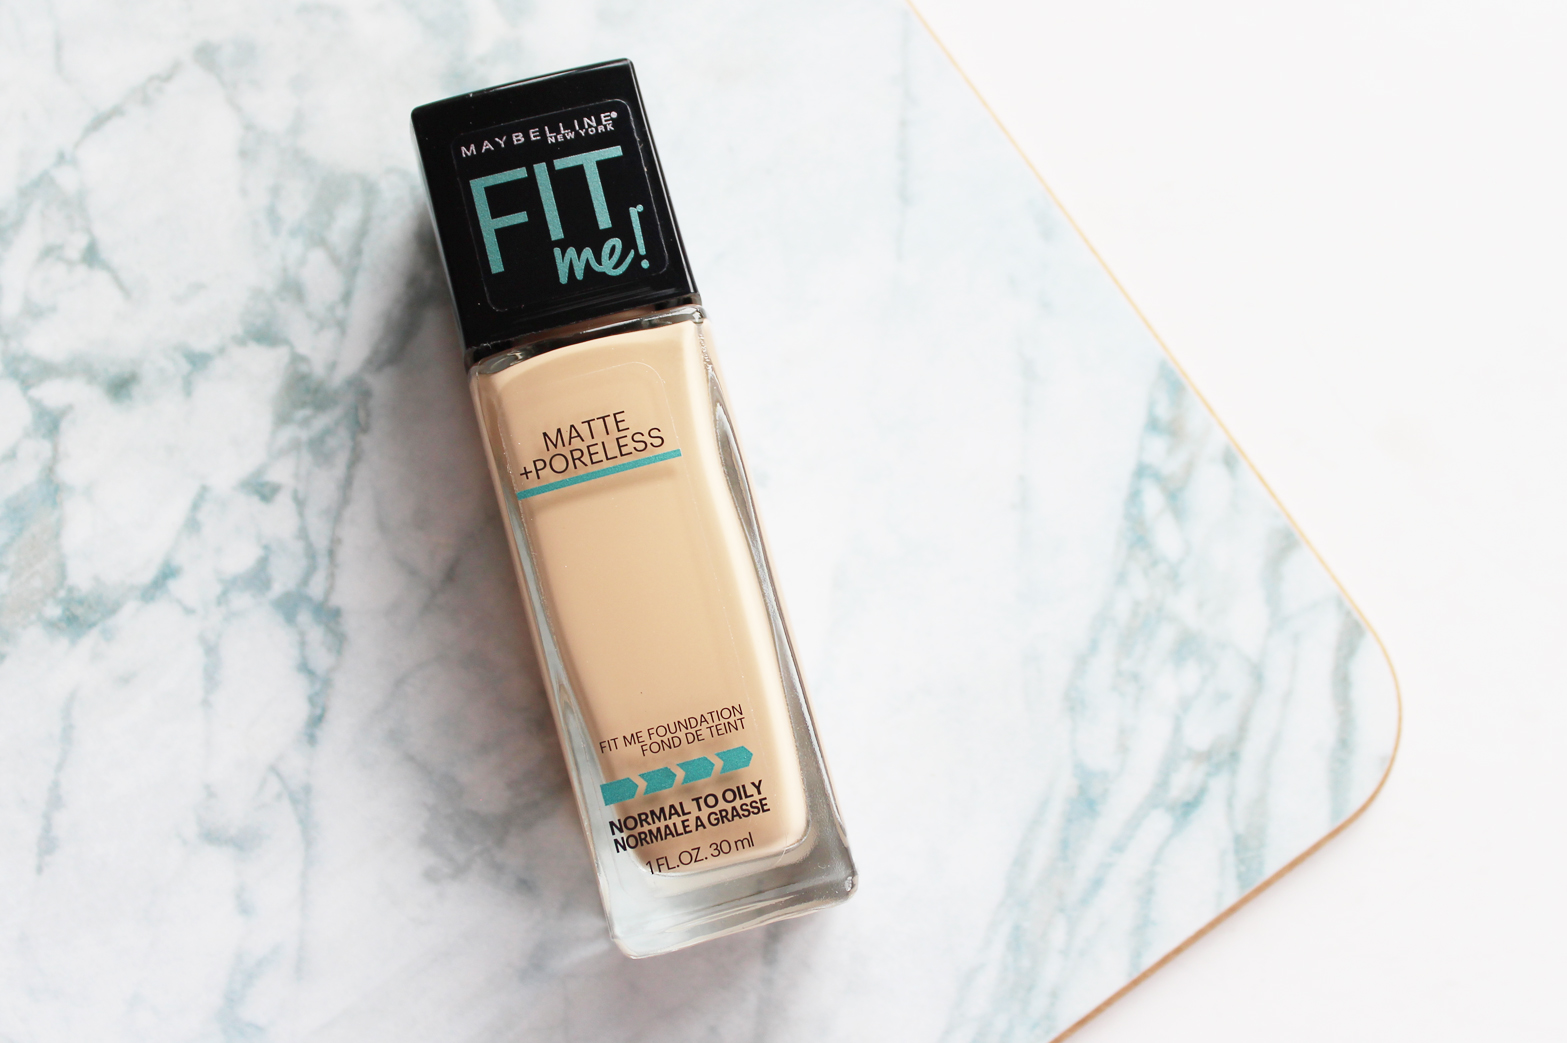 MAYBELLINE | New Releases to NZ - Fit Me! Matte + Poreless Foundation - CassandraMyee